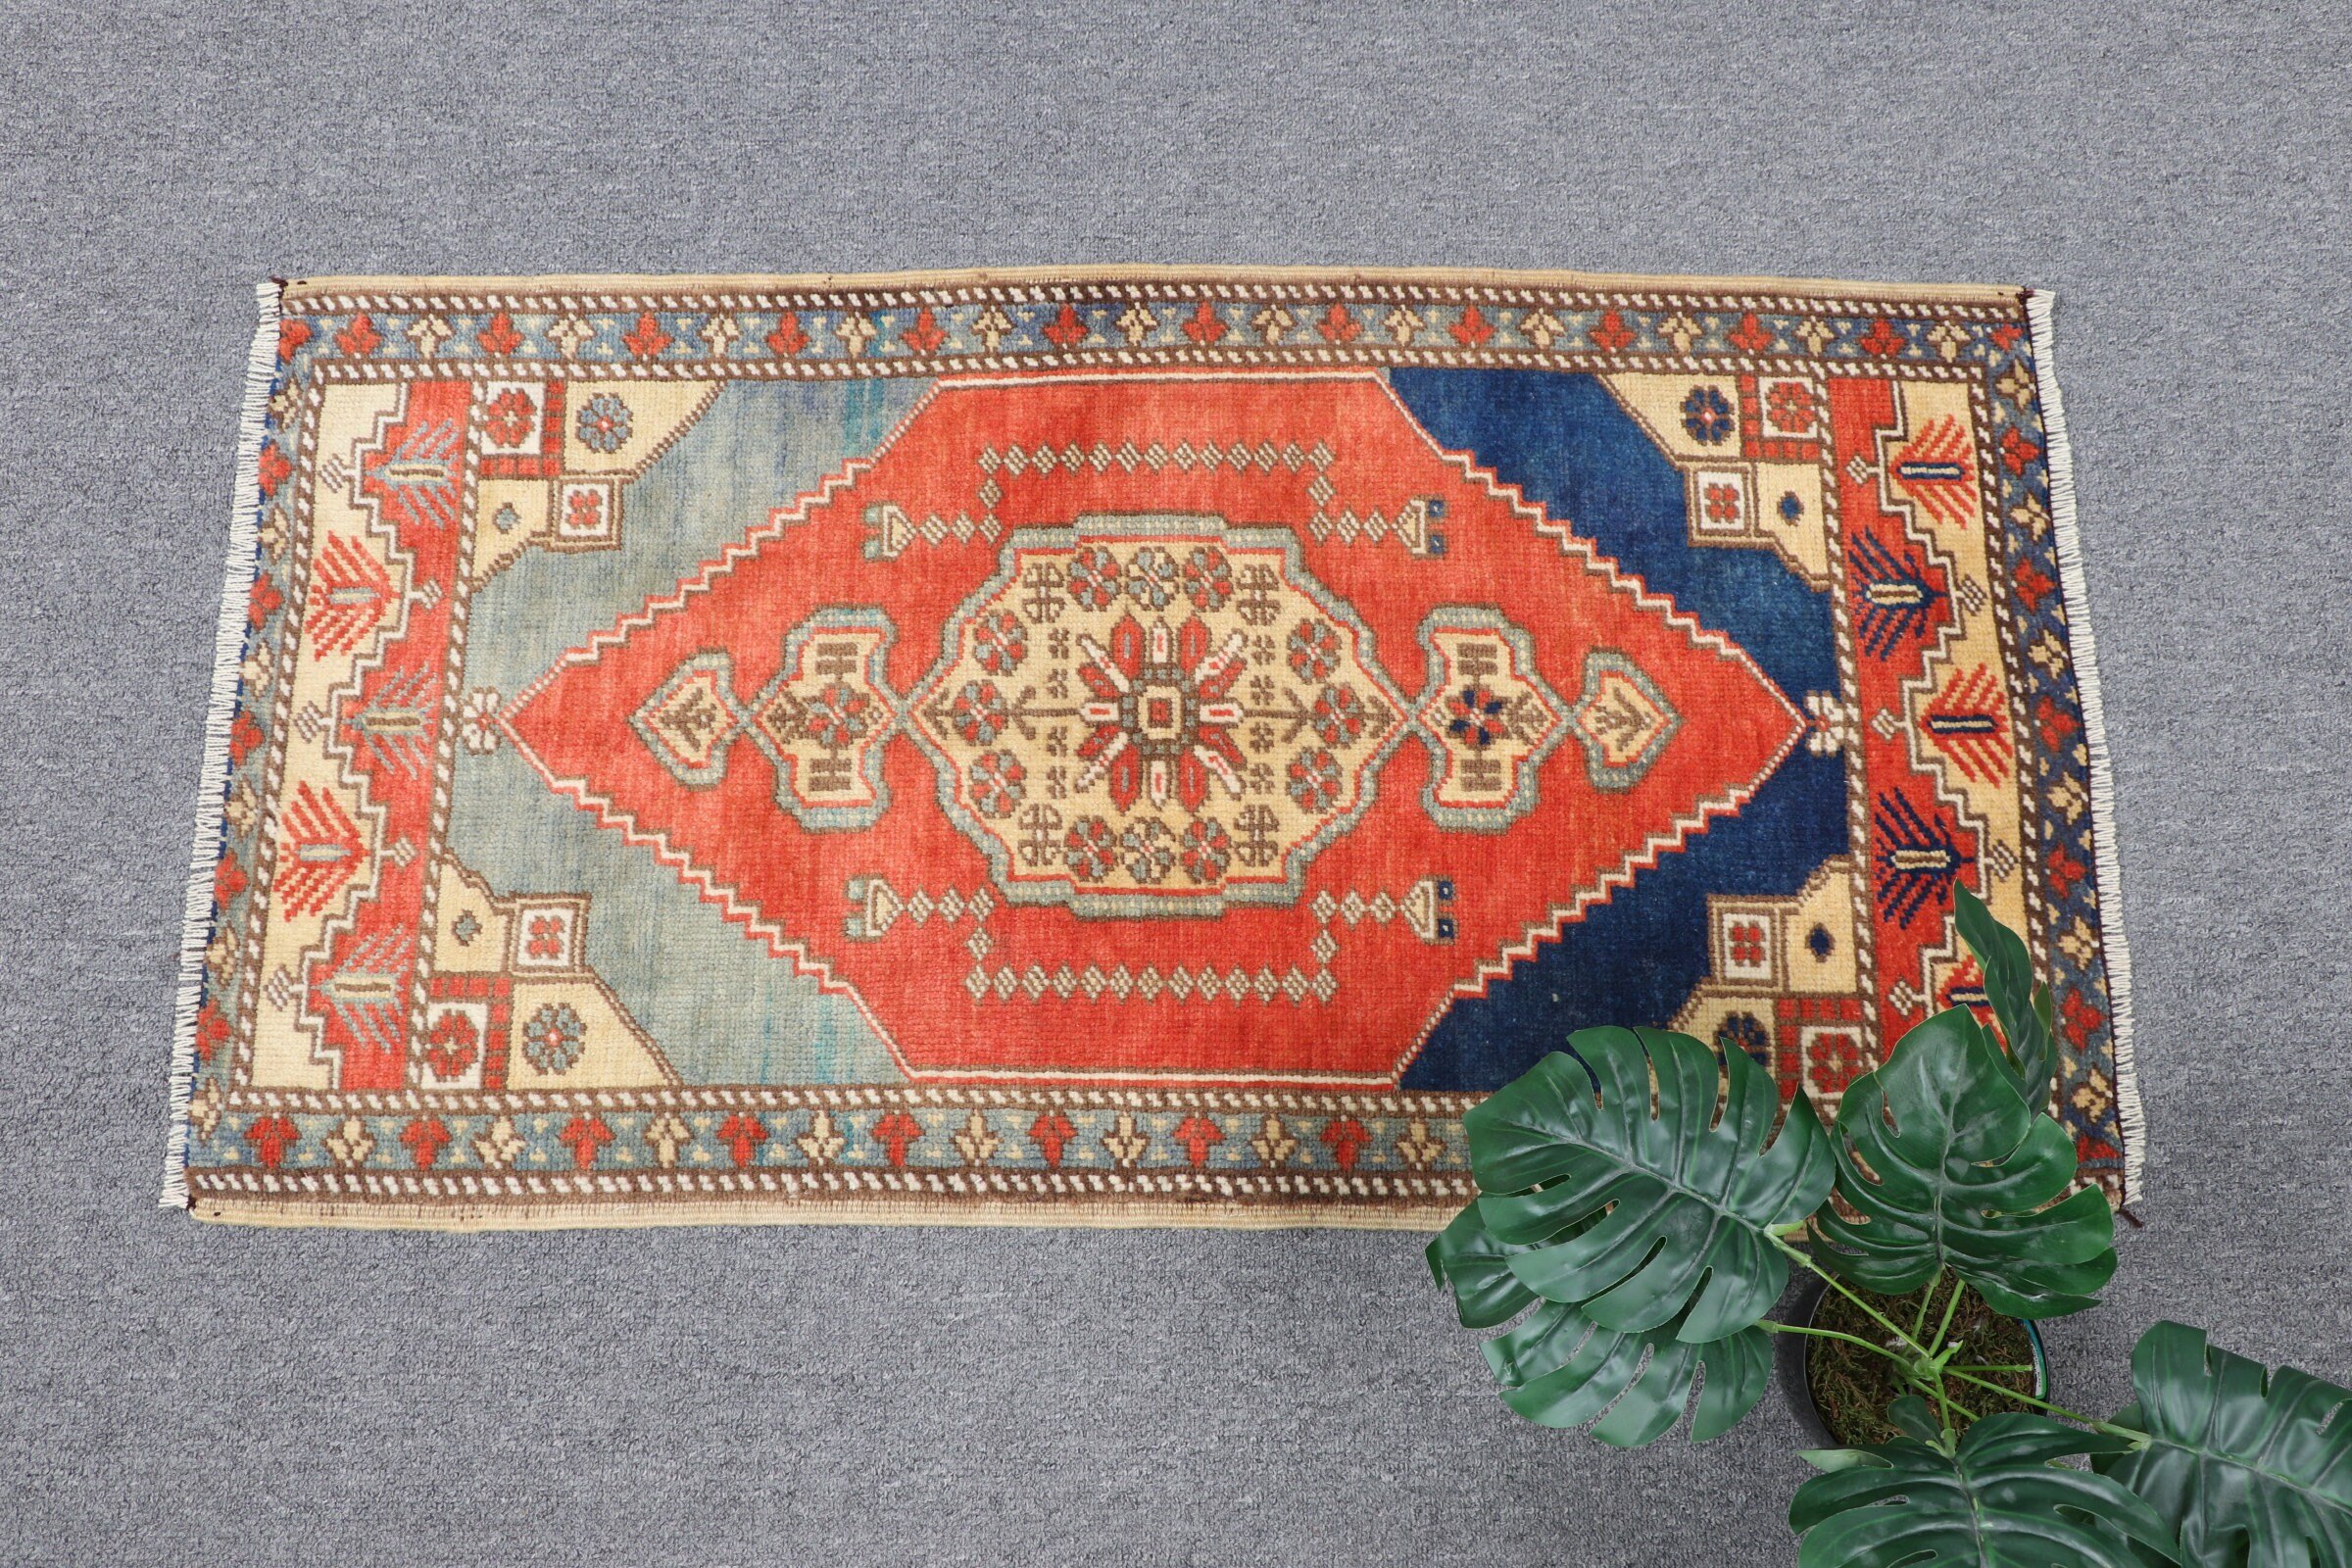 Rugs for Entry, Moroccan Rugs, Red Oushak Rugs, Cool Rug, Vintage Rug, Turkish Rugs, 1.6x3.1 ft Small Rug, Kitchen Rug, Car Mat Rugs